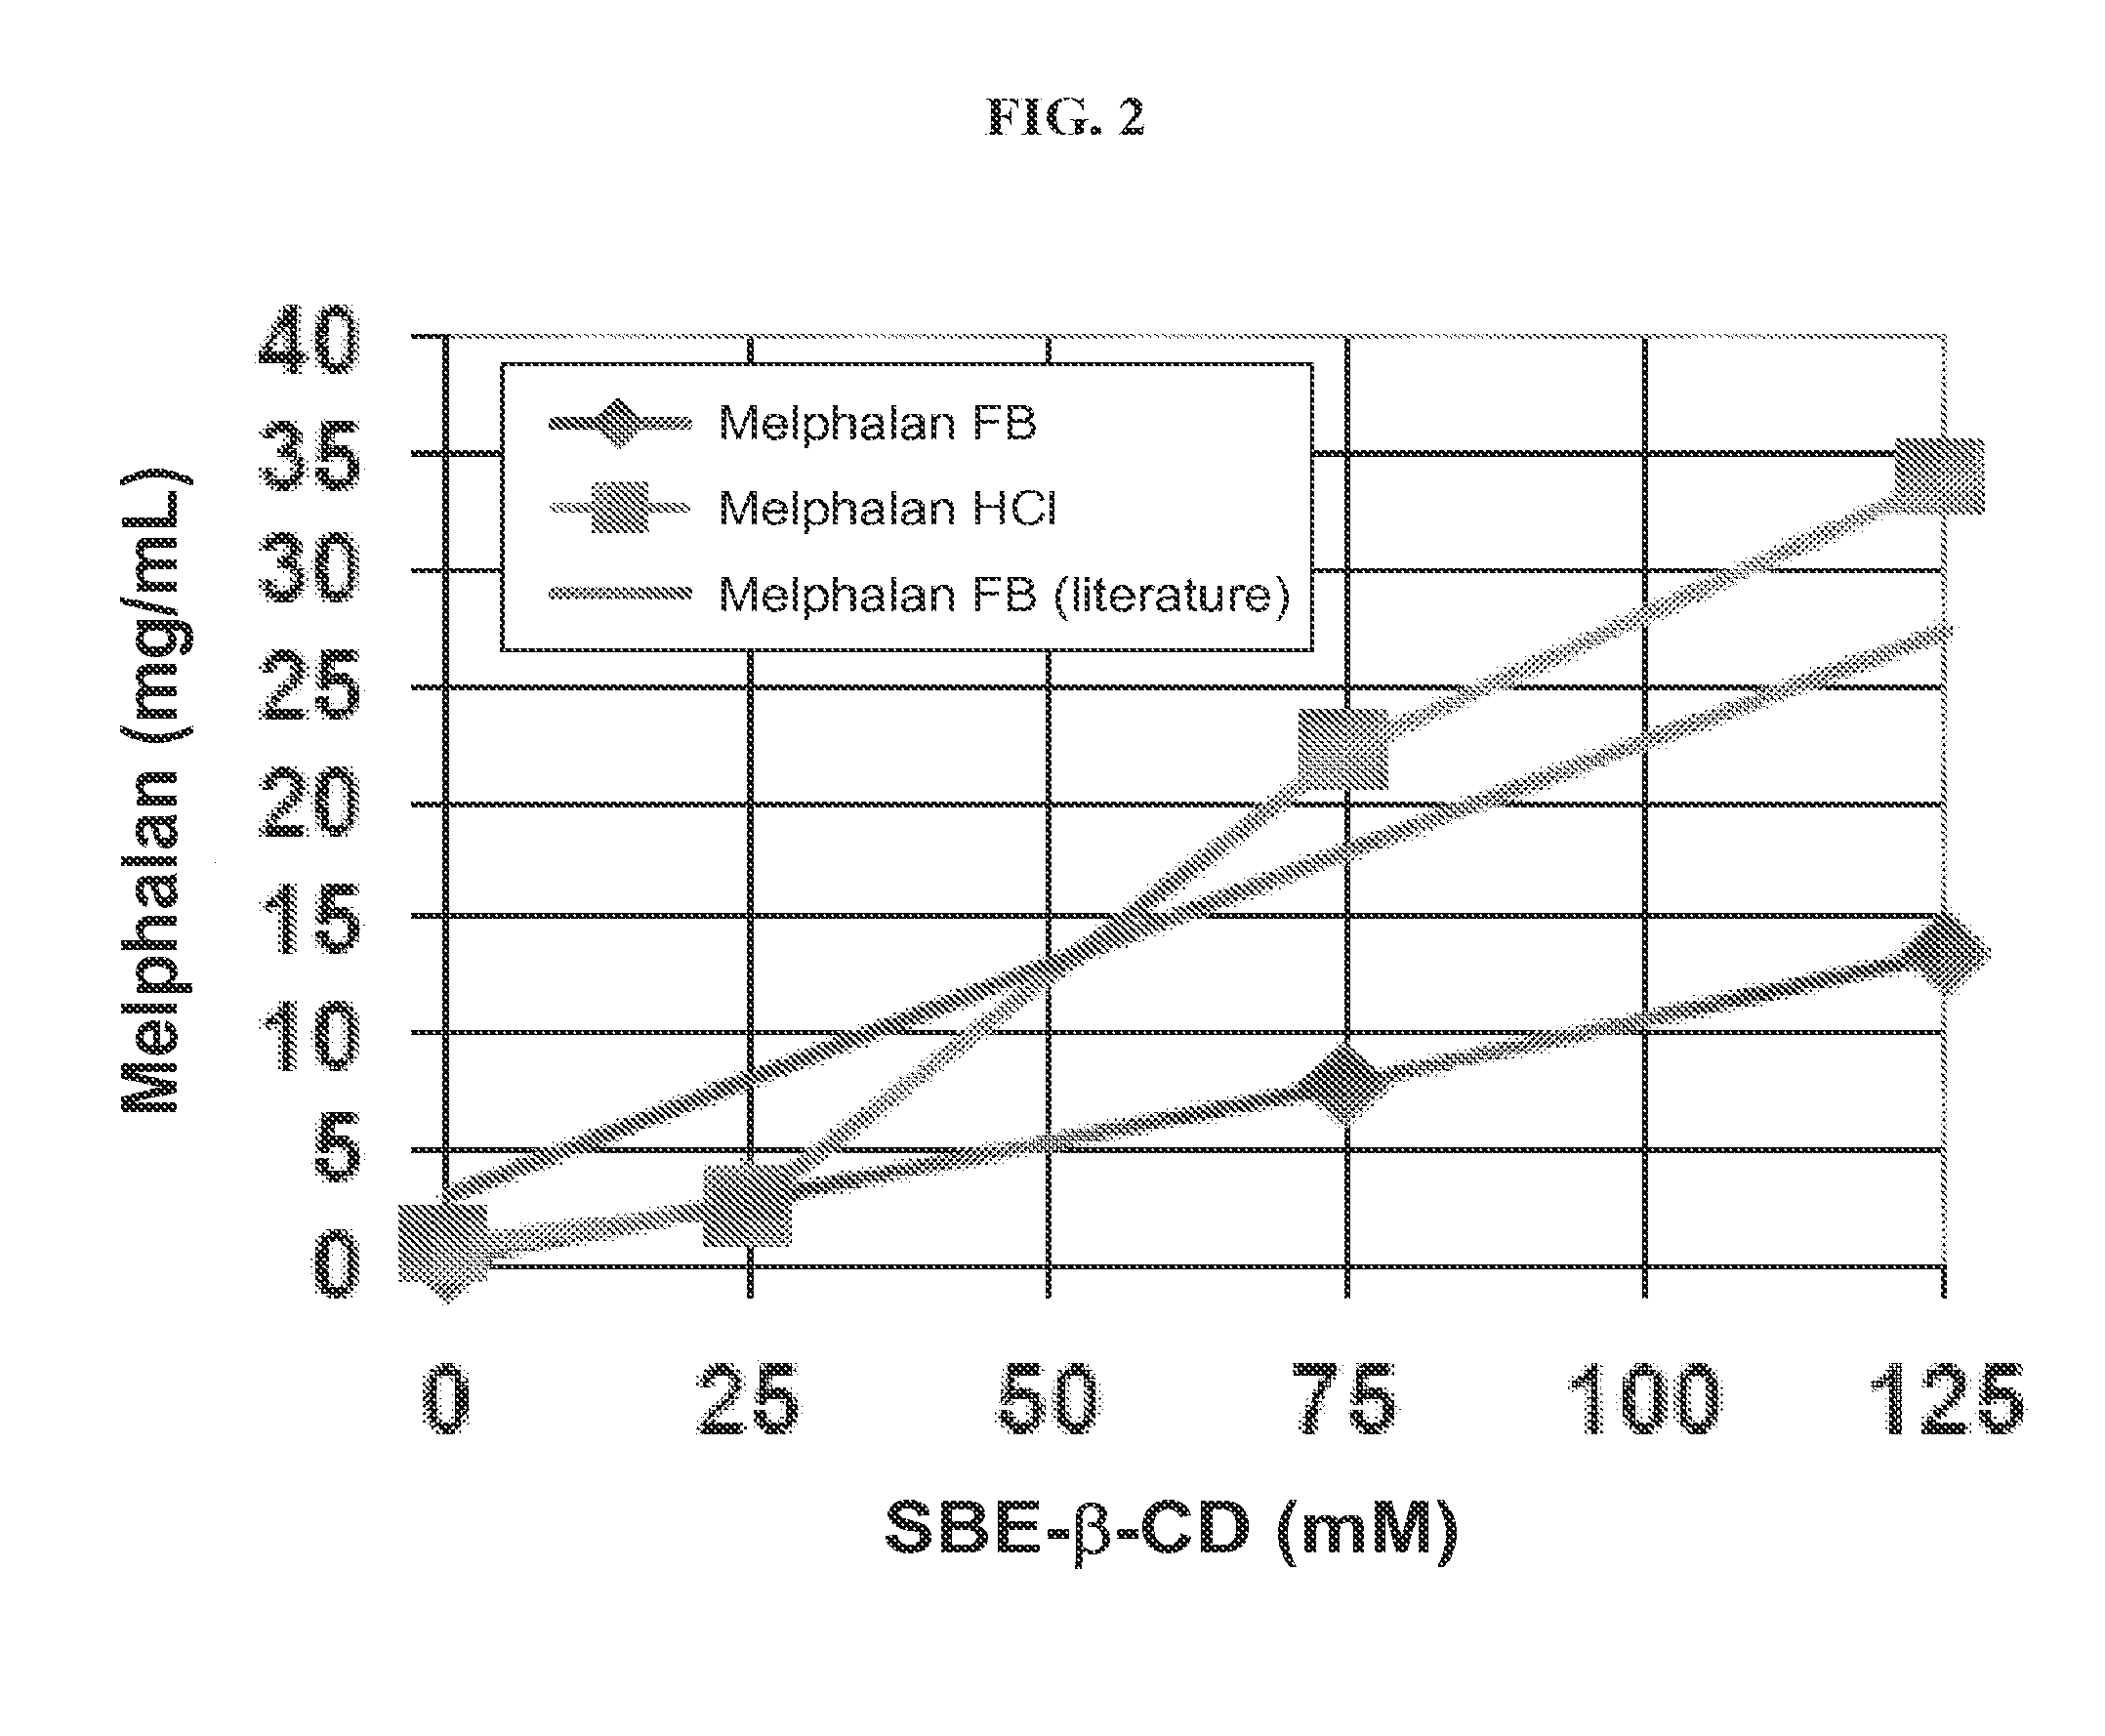 Injectable Melphalan Compositions Comprising a Cyclodextrin Derivative and Methods of Making and Using the Same